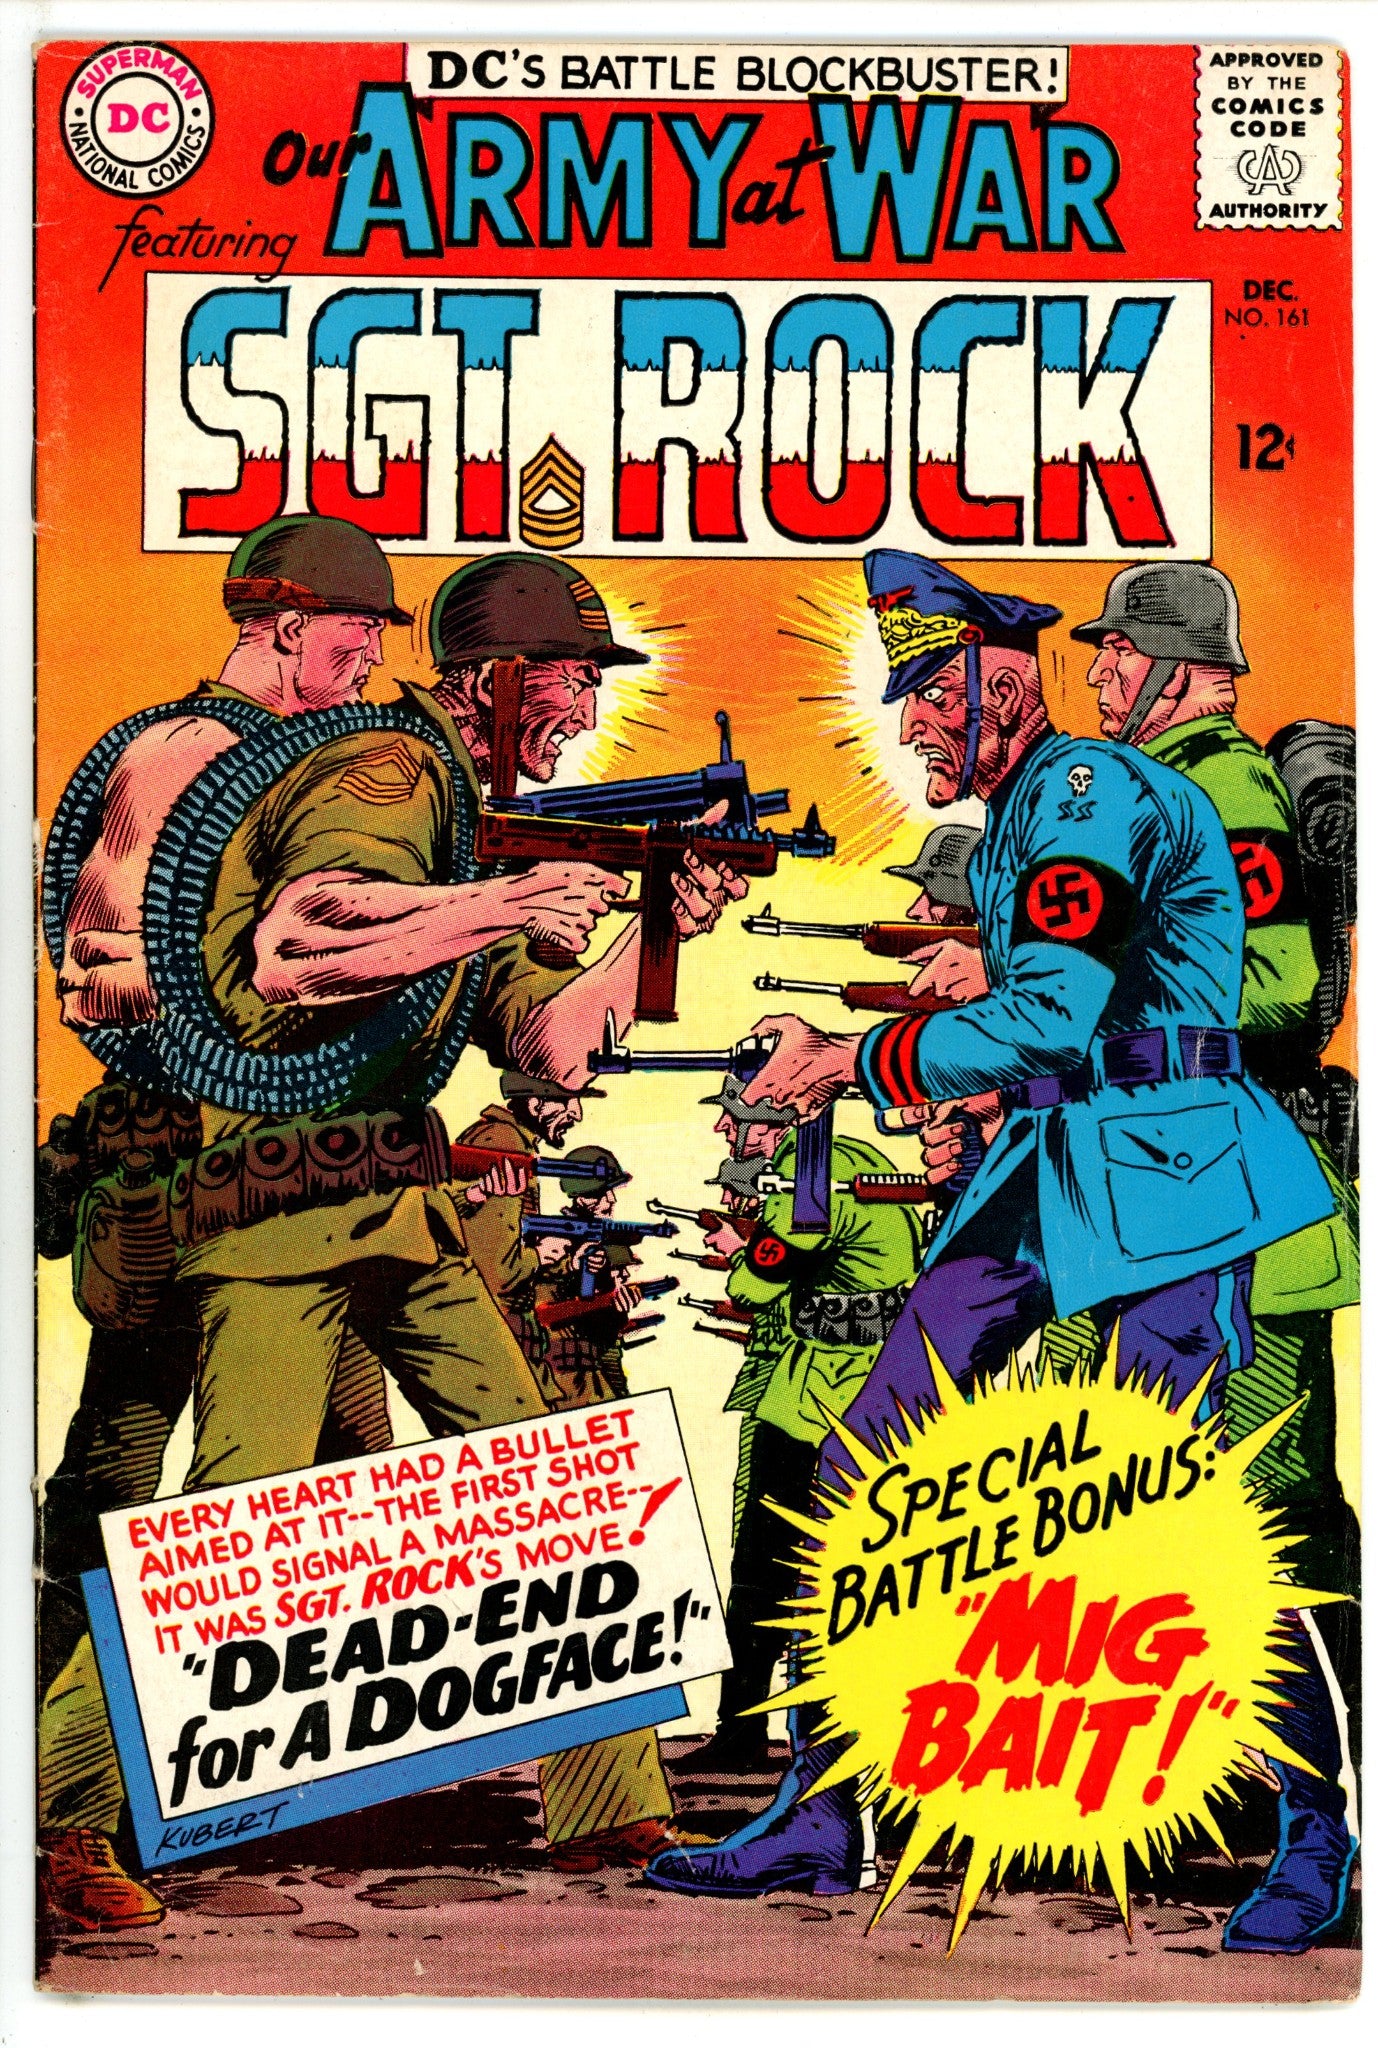 Our Army at War Vol 1 161 VG+ (4.5) (1965) 